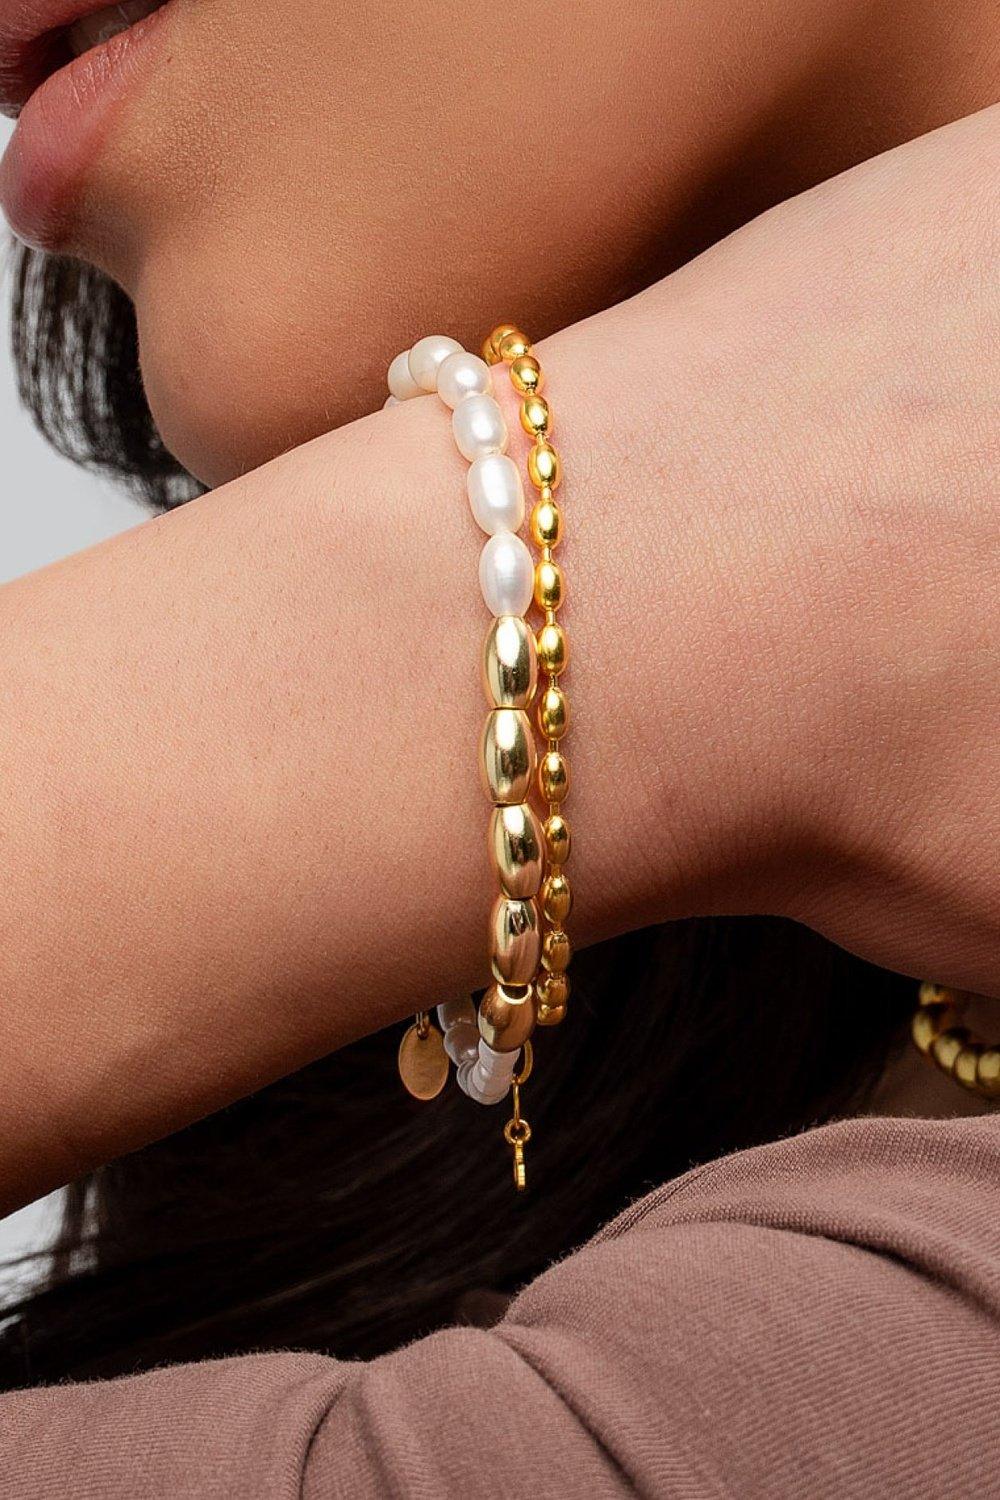 Gold & Pearl Beads Bundle